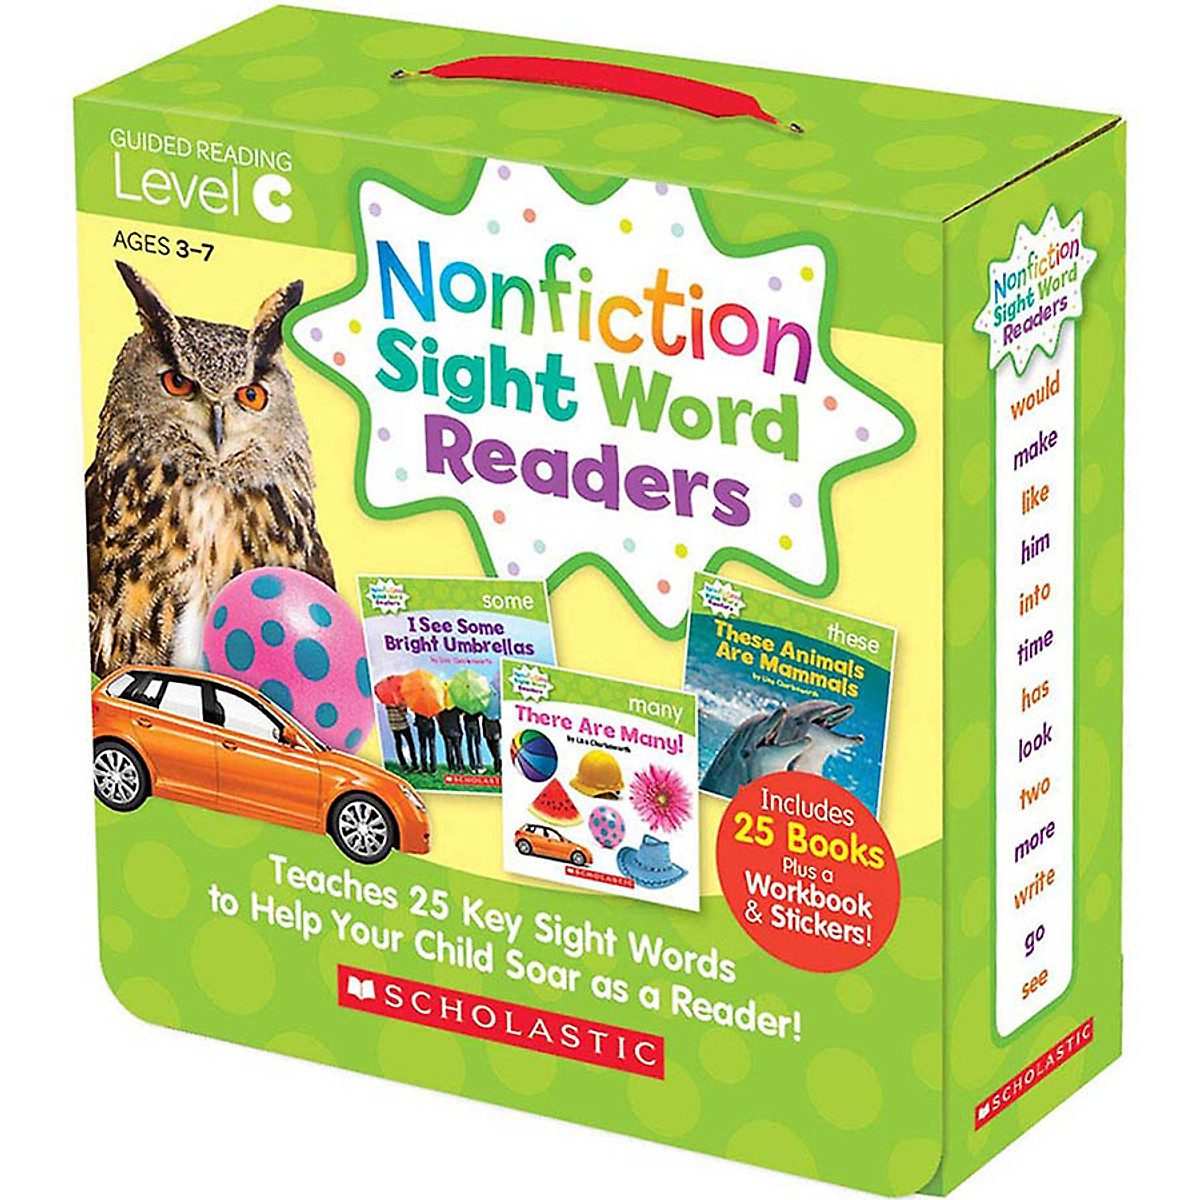 [Hàng thanh lý miễn đổi trả] Nonfiction Sight Word Readers - Parent Pack: Guided Reading Level C (Teaches 25 Key Sight Words to Help Your Child Soar as a Reader)